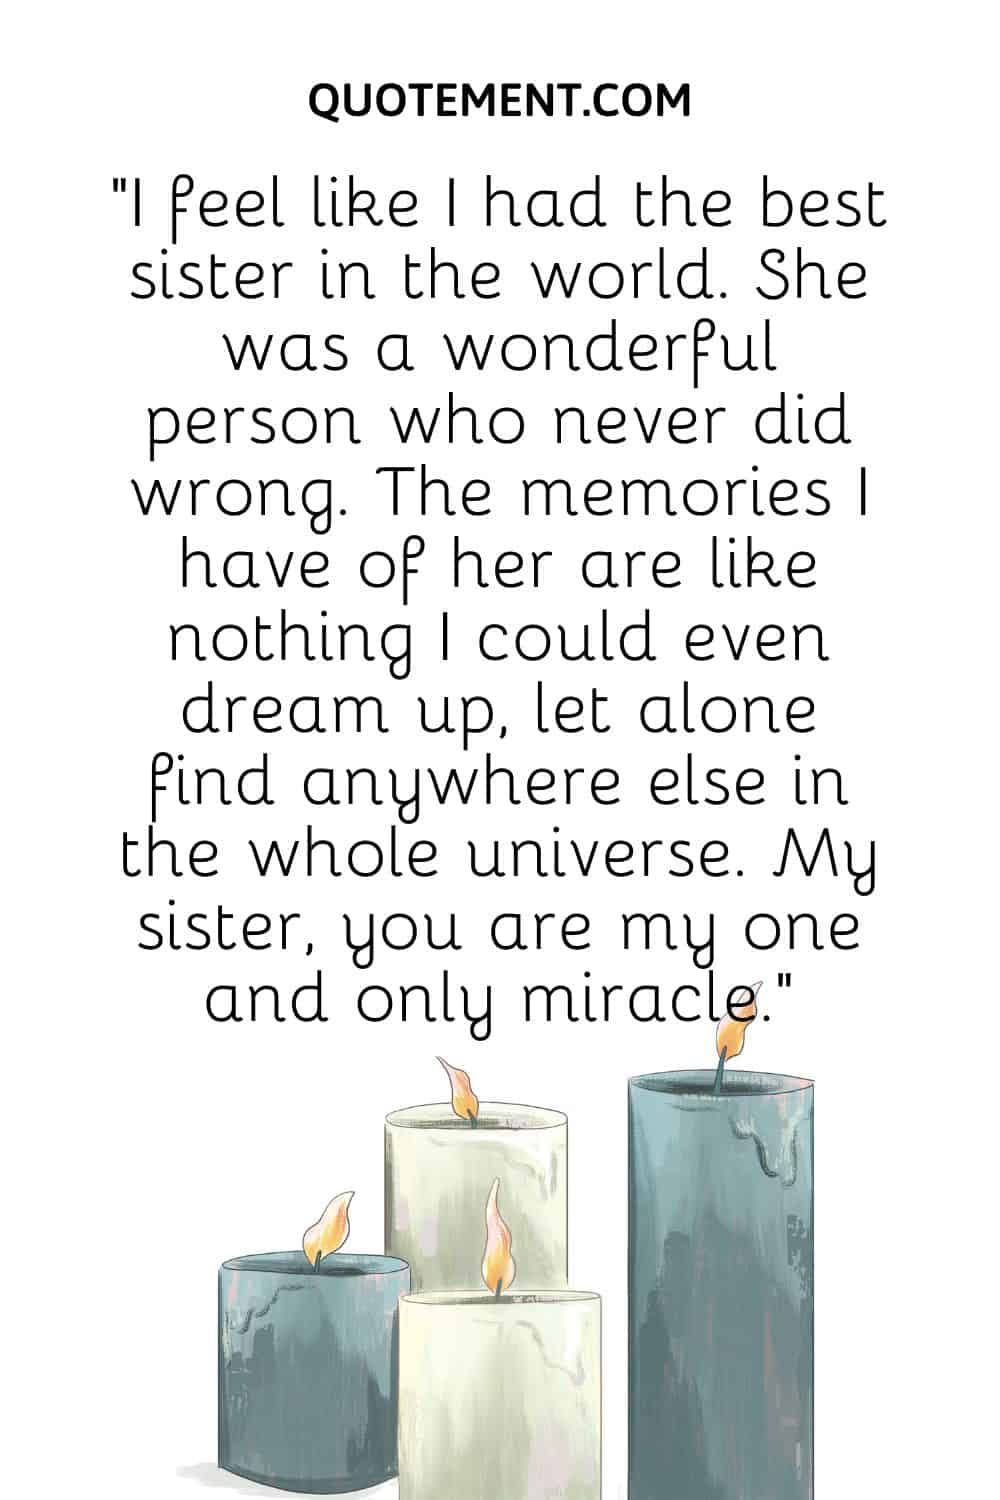 “I feel like I had the best sister in the world. She was a wonderful person who never did wrong.